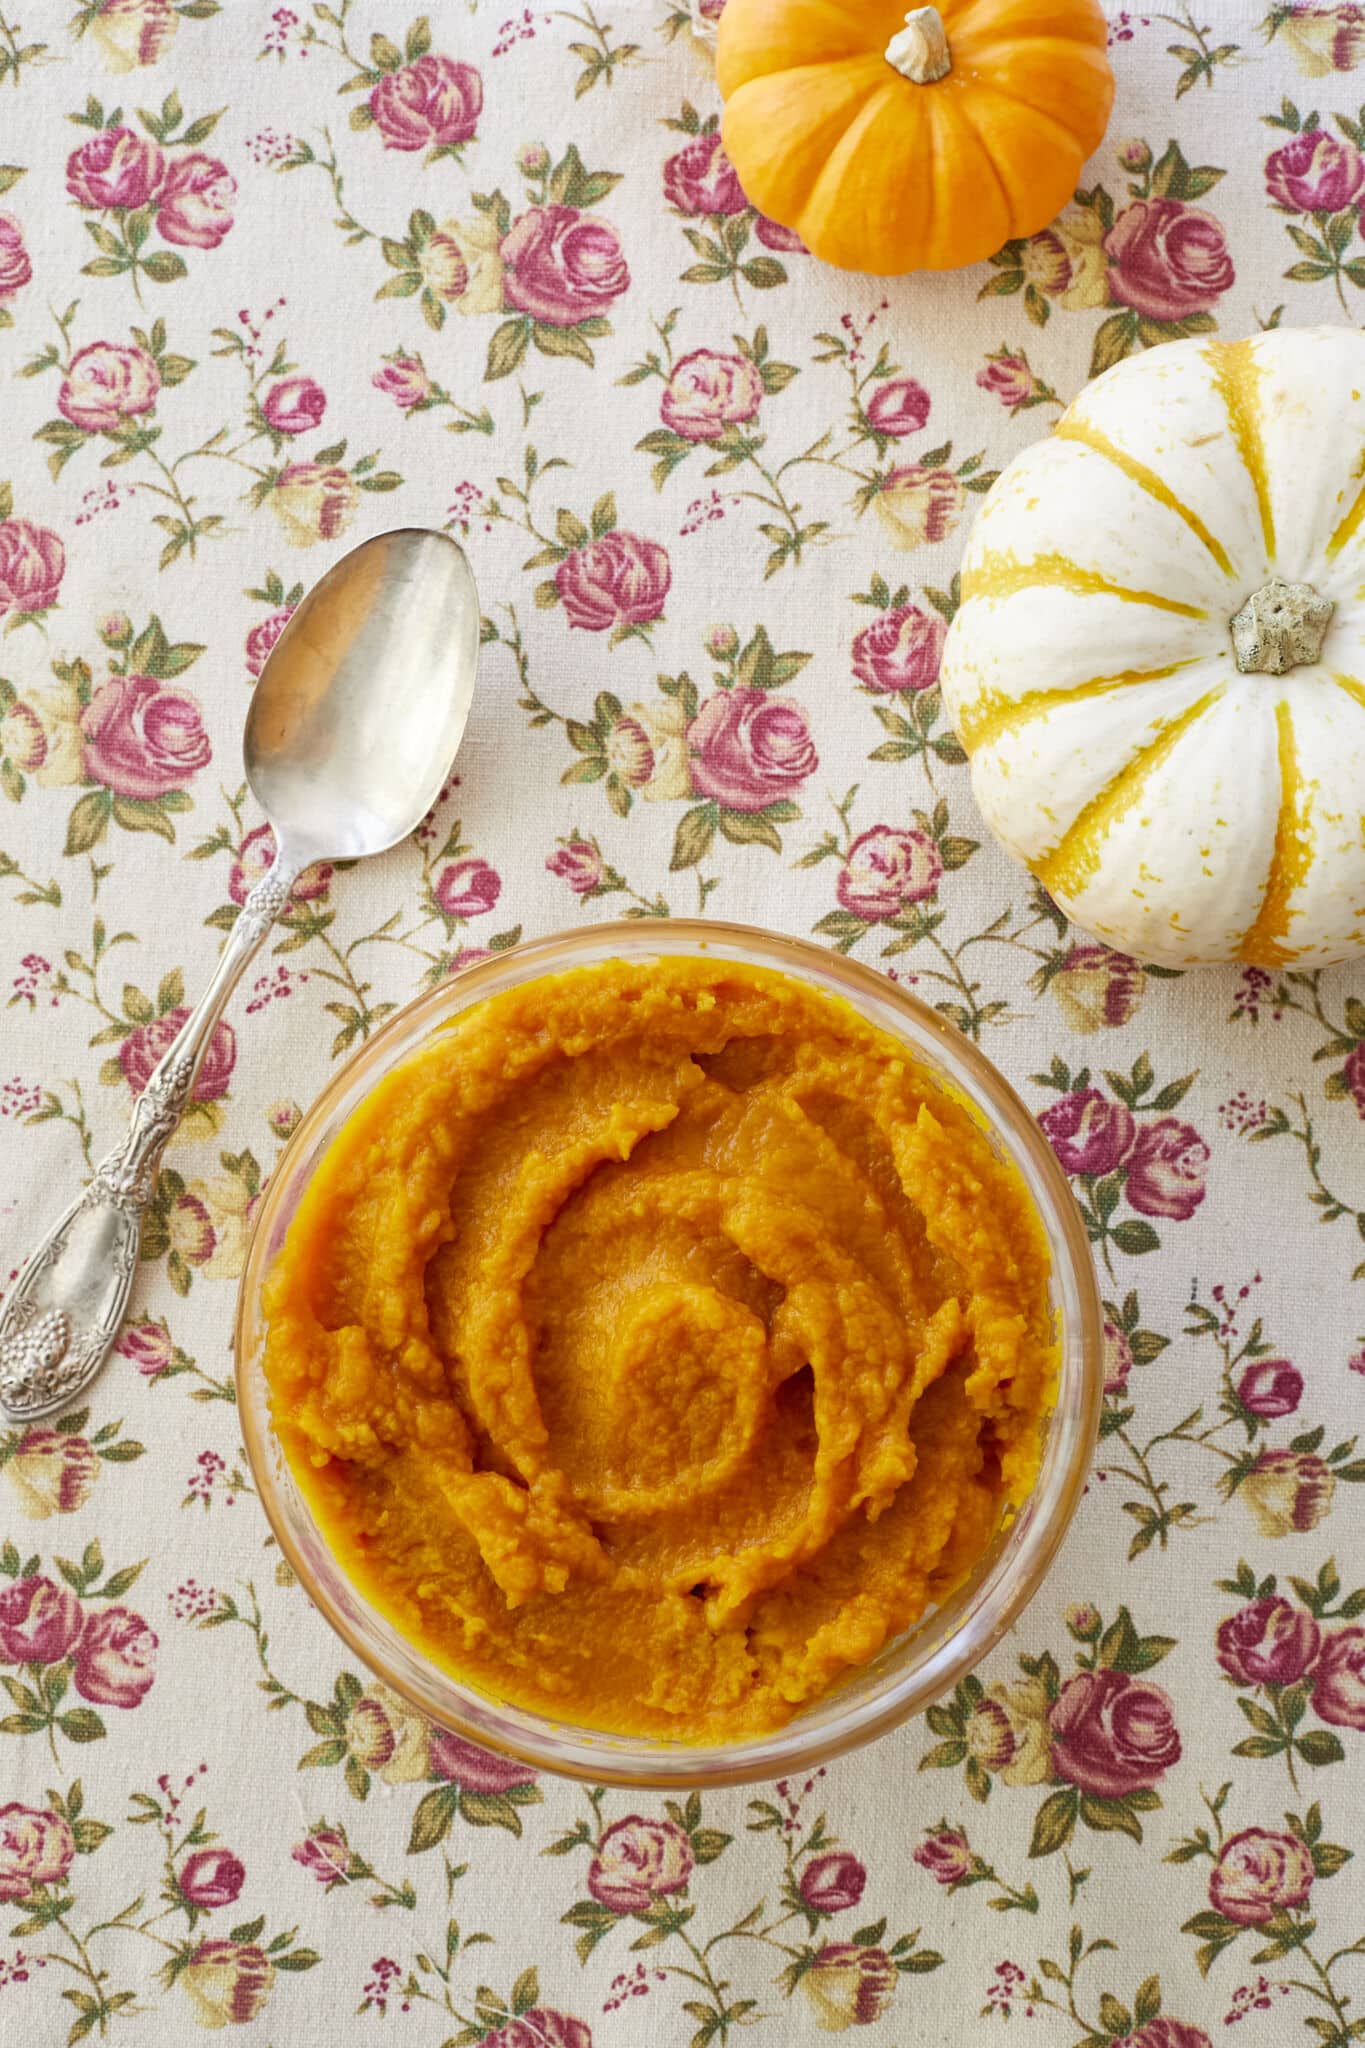 Homemade Pumpkin puree is in a glass bowl in a vibrant orange color and with a smooth moist consistency. A silver spoon is on the left and an orange sugar pumpkin and a white pumpkin are on the right side.